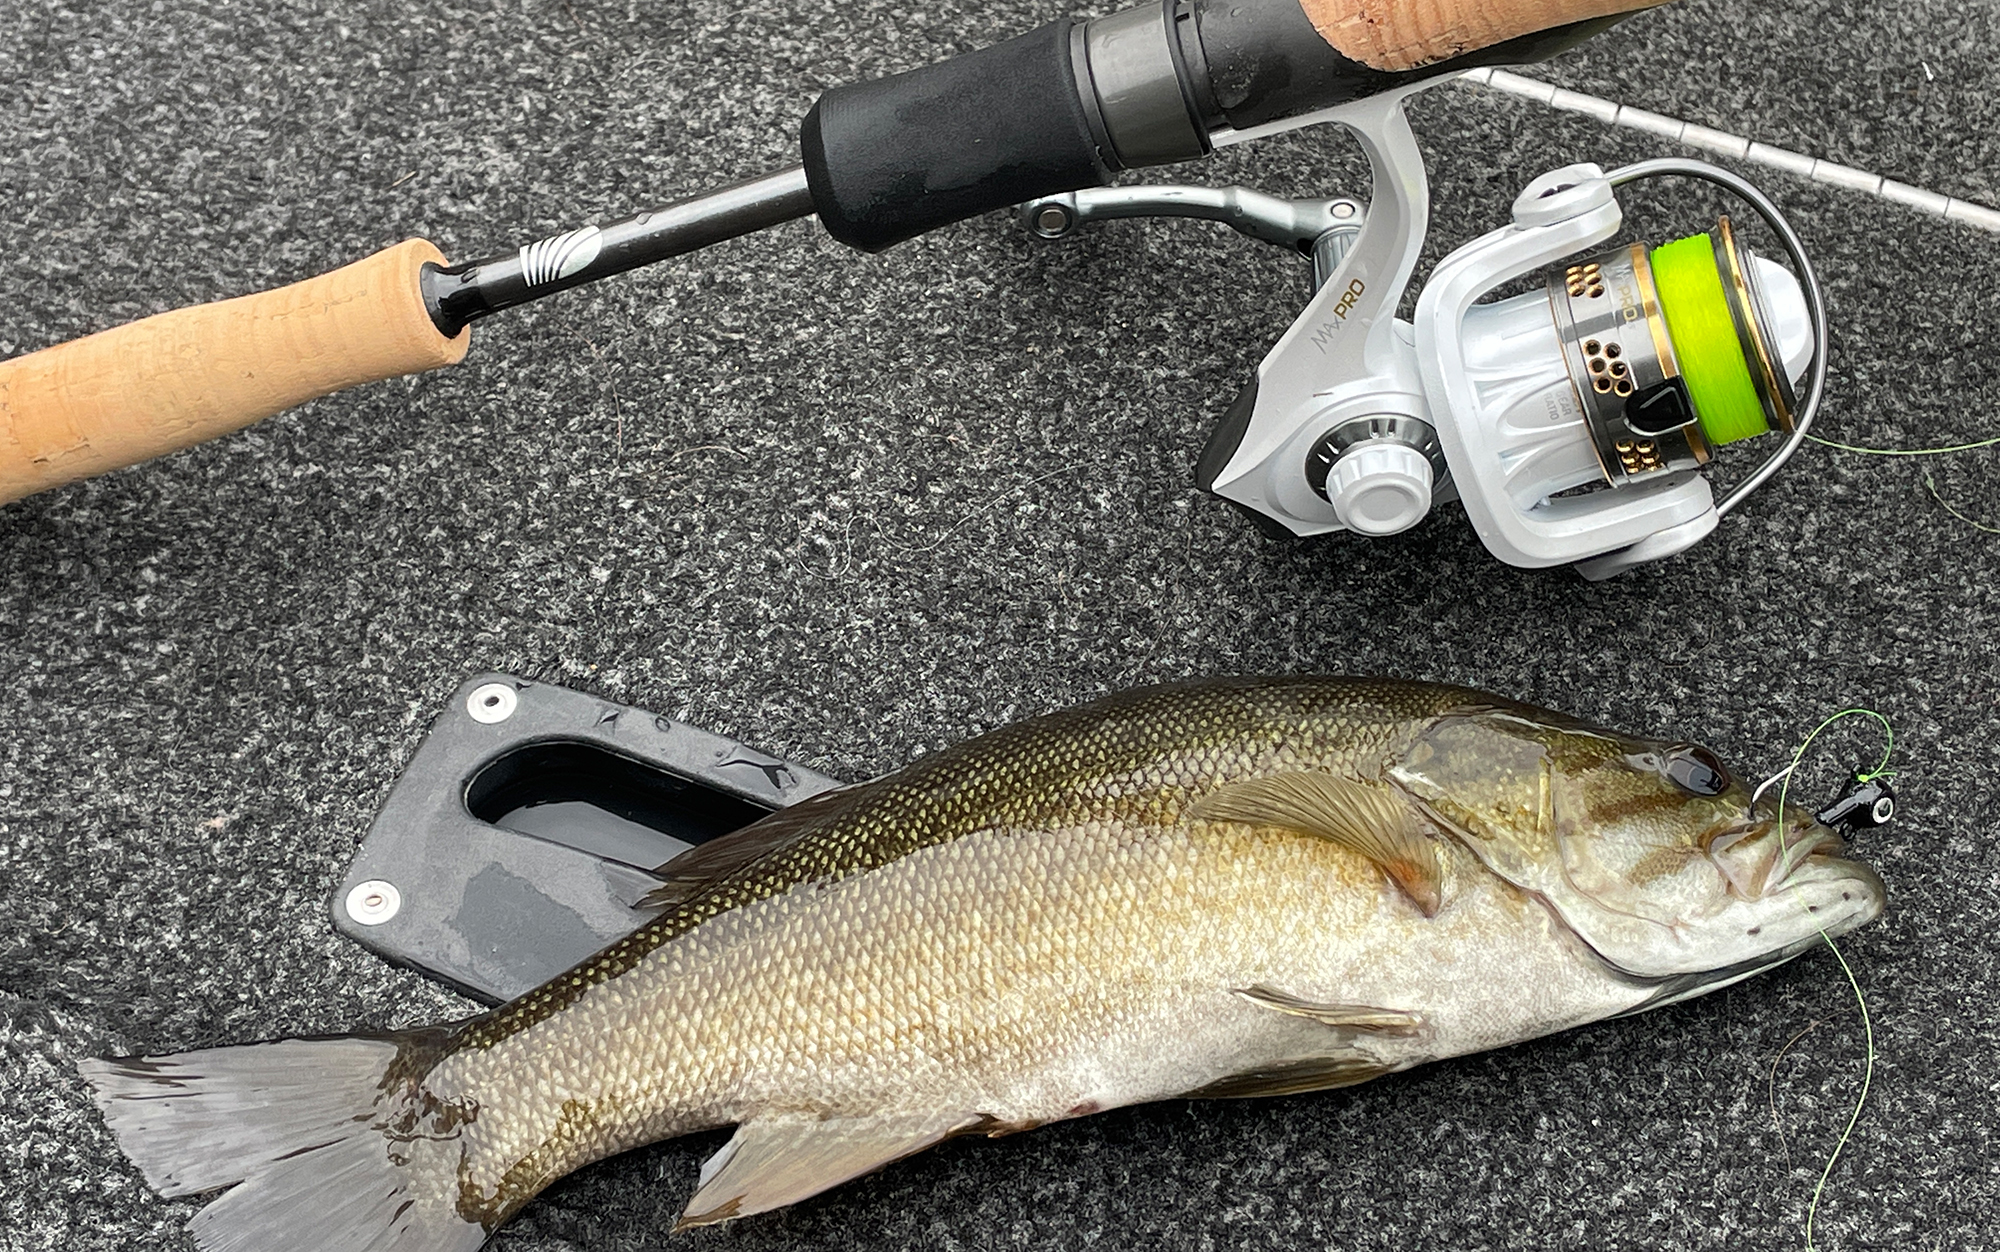 The author caught a host of species while testing the MaxPro including this smallmouth bass.